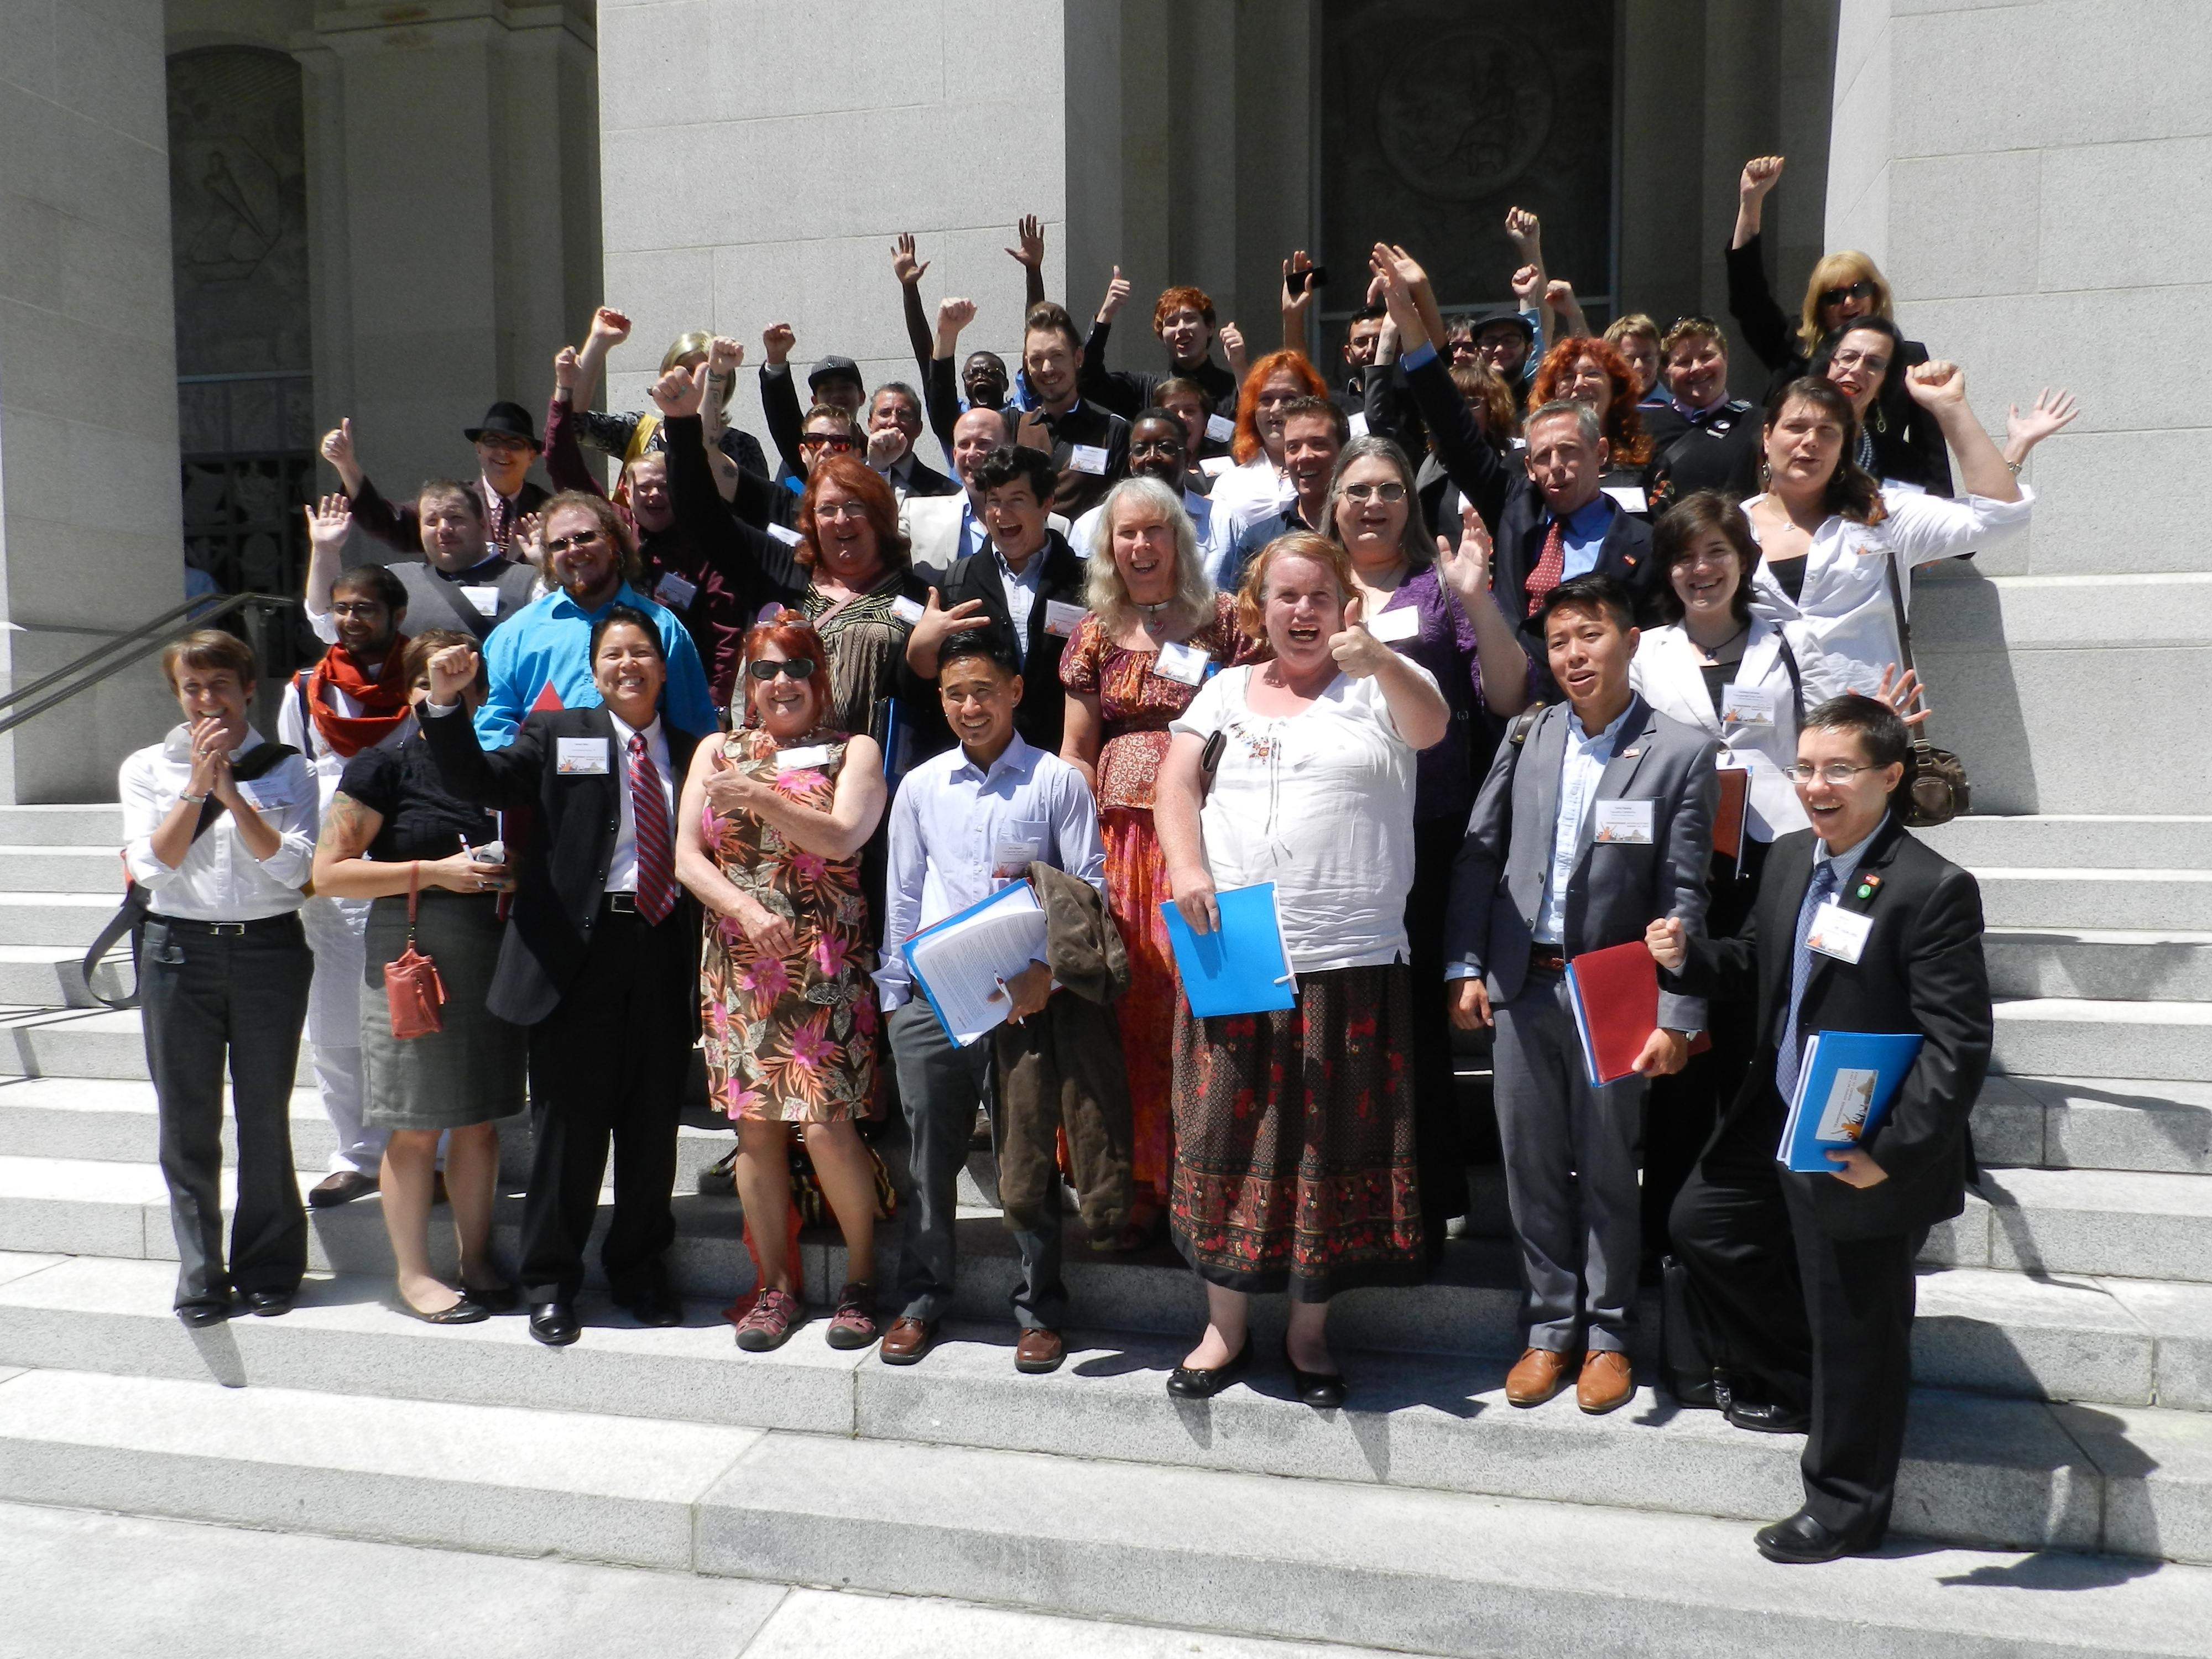 Image: Approximately 50 California Transgender Advocacy Day Citizen Lobbyists Cheering At The News Governor Brown Signed AB 1266 (The School Success and Opportunity Act) On August 12, 2013